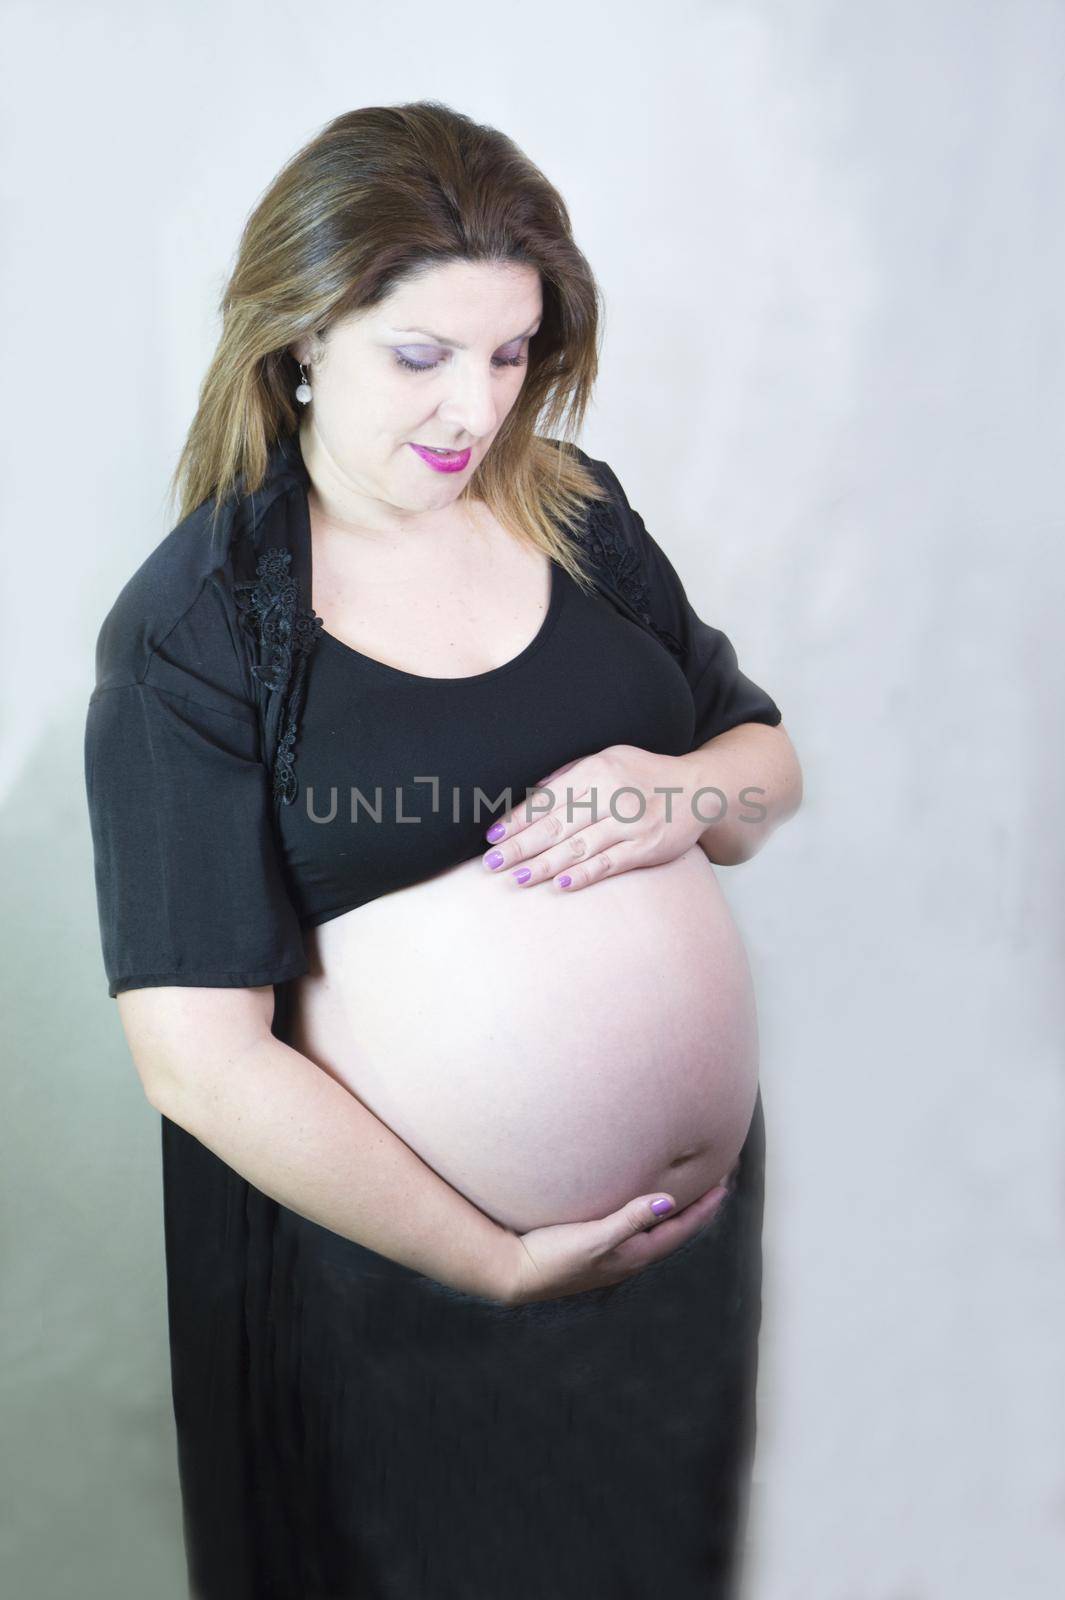 Eight month pregnant woman with bare belly by GemaIbarra